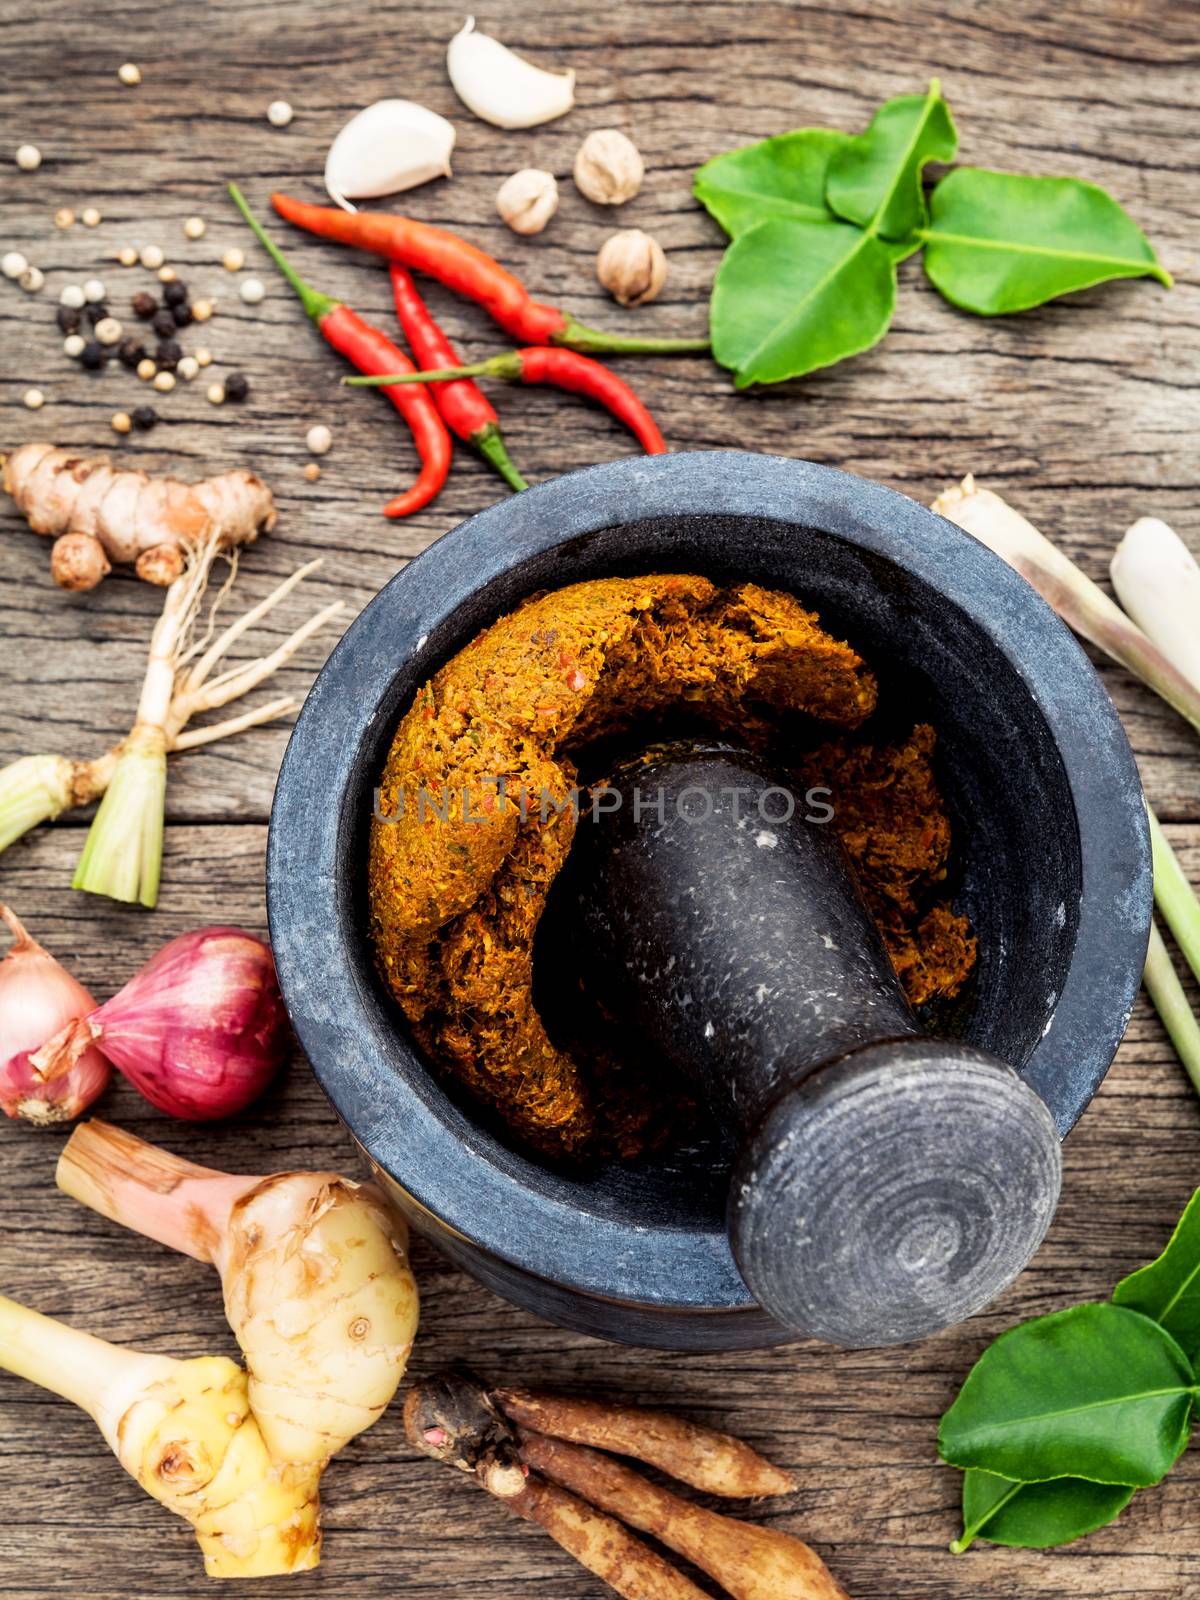 Assortment of Thai food Cooking ingredients and Paste of thai popular food red curry  with mortar and pestle on rustic wooden background. Spices ingredients chilli ,pepper, garlic,galanga lemongrass and Kaffir lime leaves .